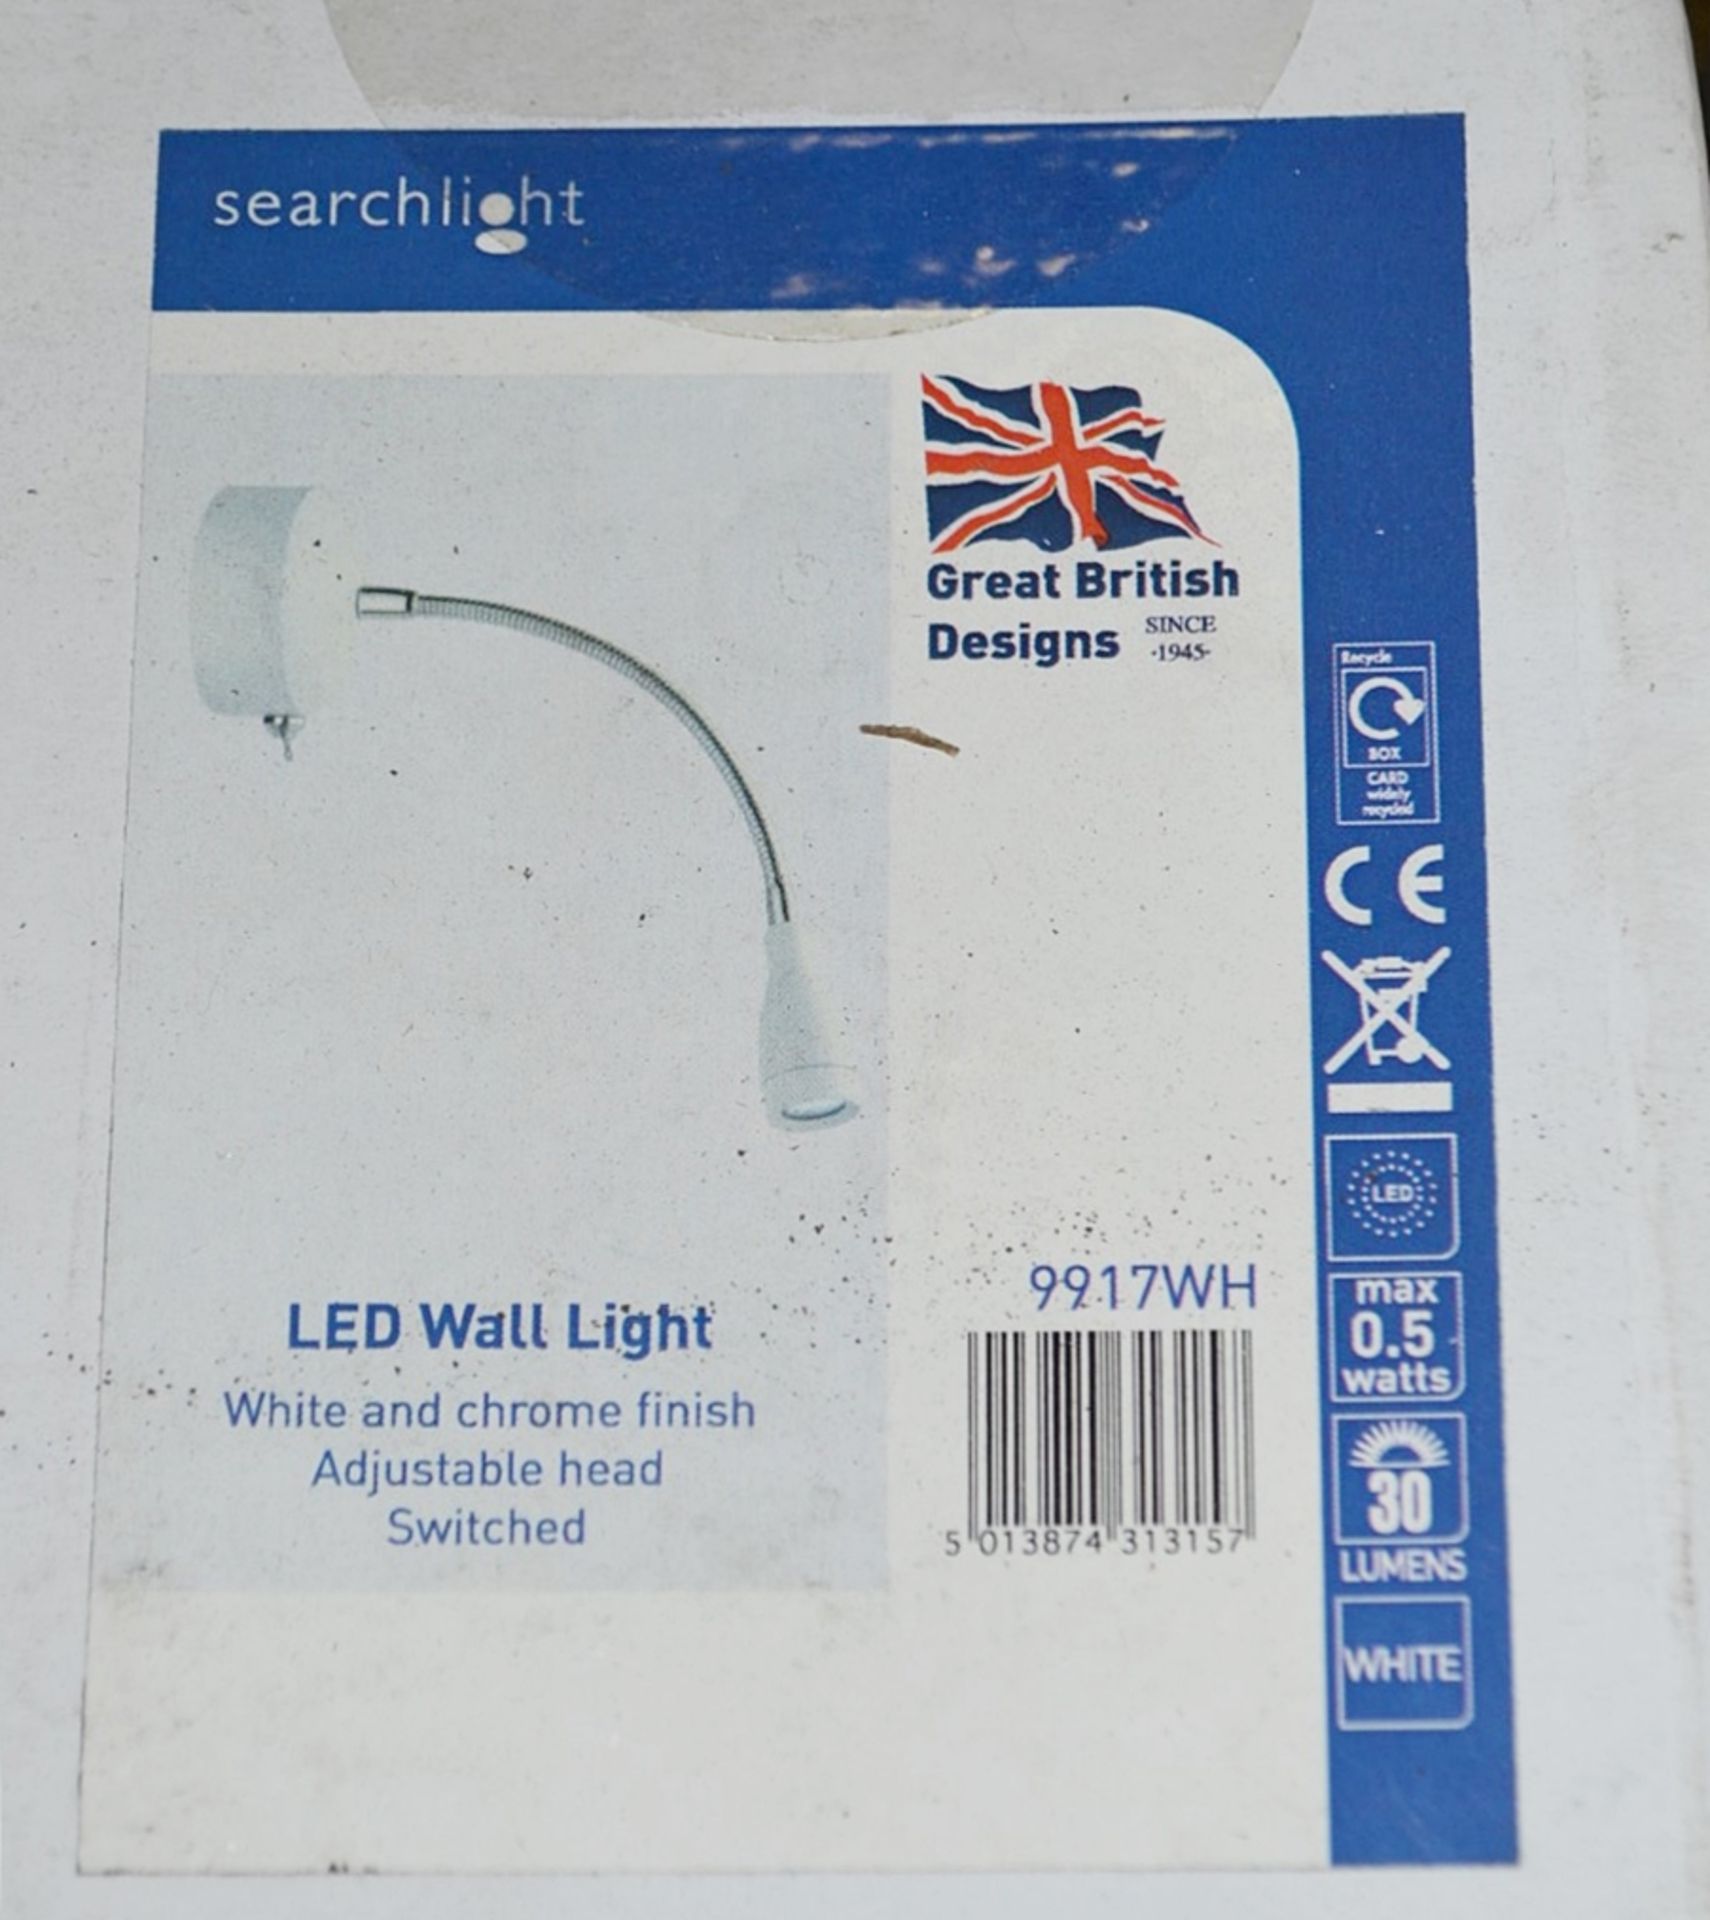 5 x Searchlight LED Wall Lights Finished In White and Chrome - Brand New and Boxed - 9917WH - Ref: J - Image 3 of 3